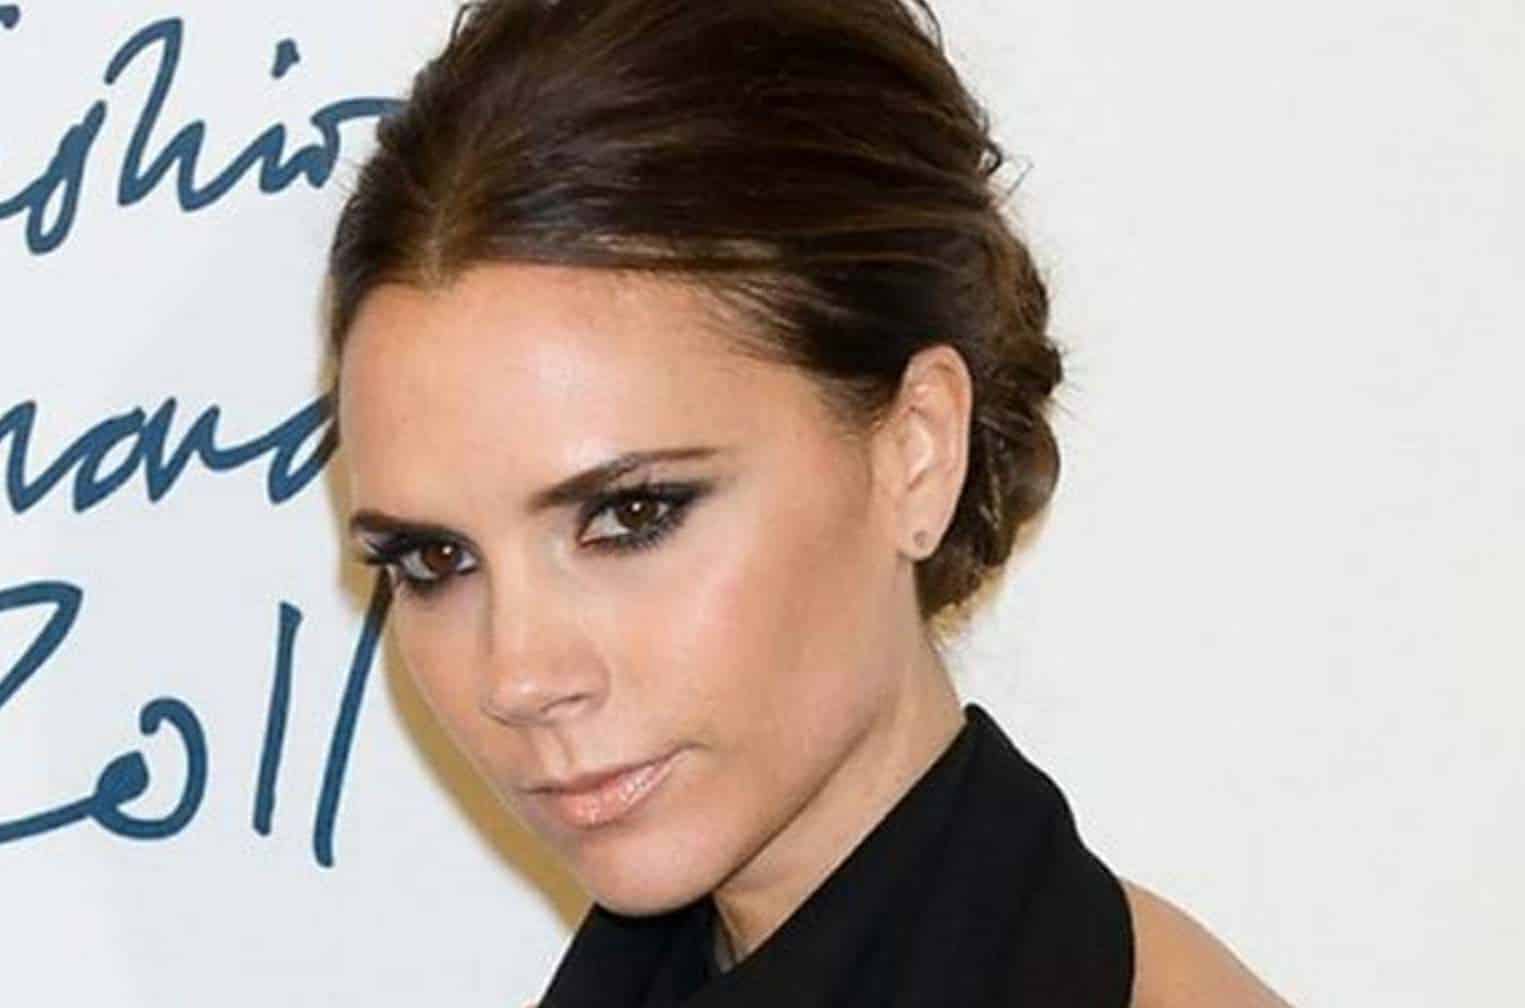 Victoria Beckham In An Event [Credits- Getty Images]